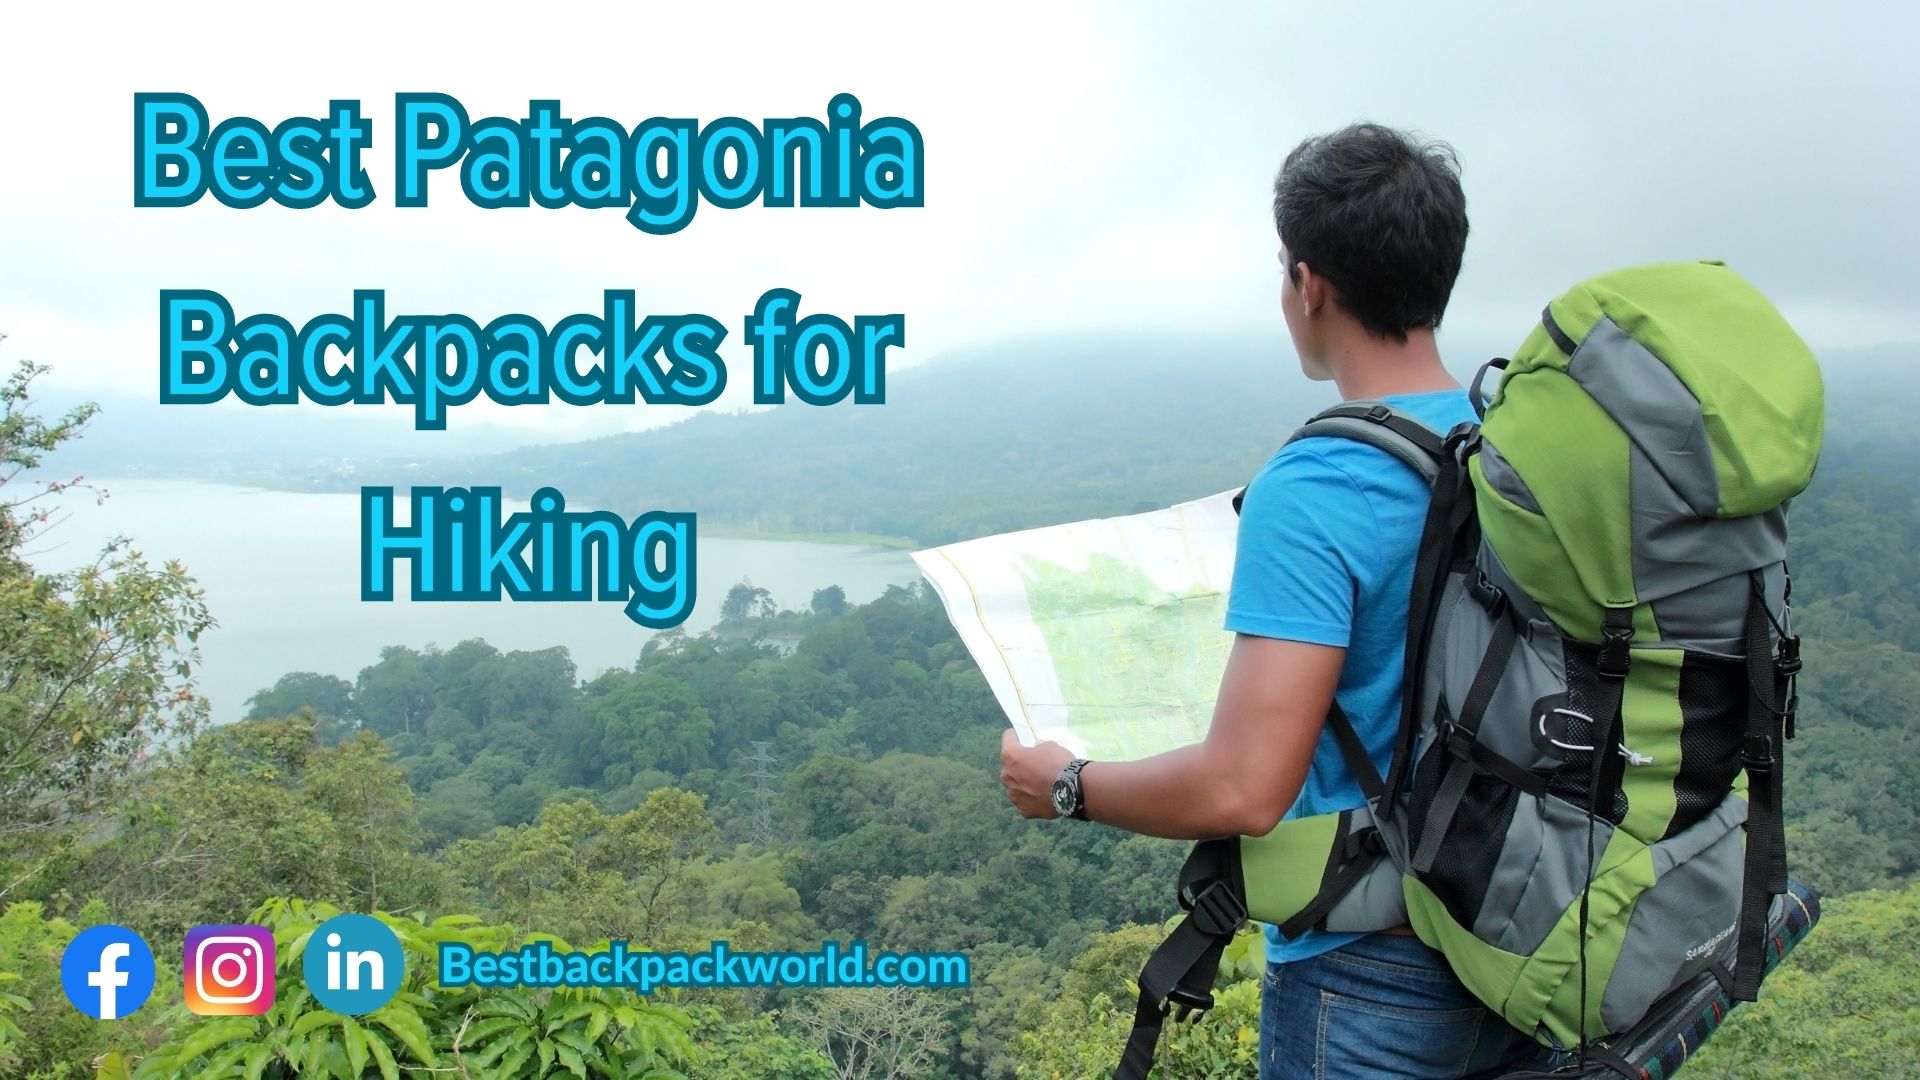 Best Patagonia Backpack for Hiking